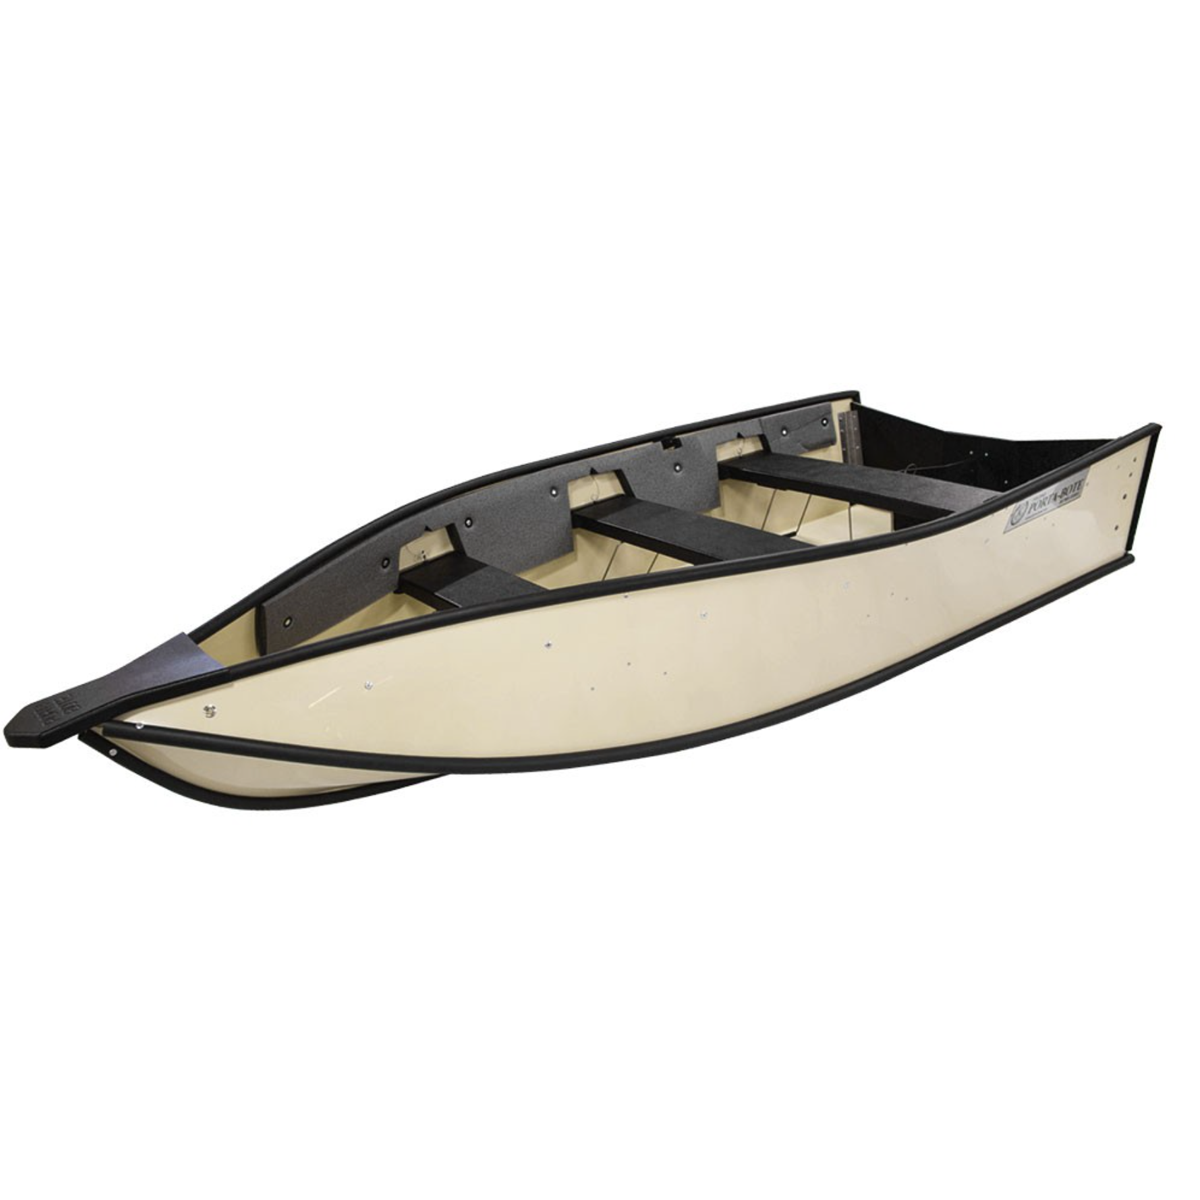 PORTA-BOTE - The Foldable, Lightweight Watercraft for Fishing, Hunting, Sailing, Rescue, and More!